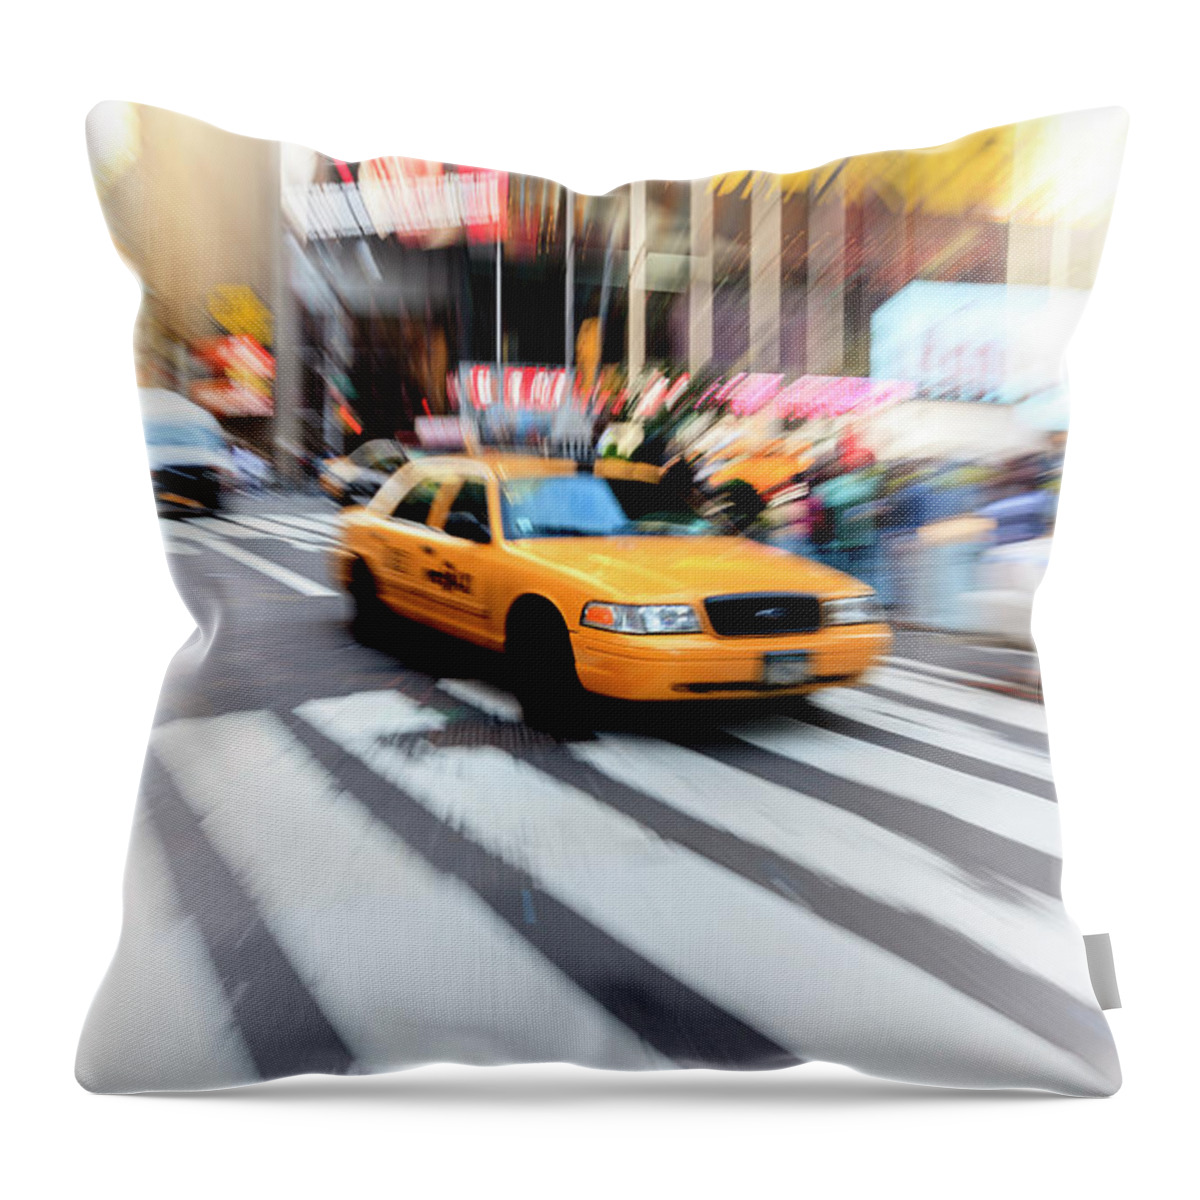 Blurred Motion Throw Pillow featuring the photograph Taxi & Reflections, Times Square, New by Fred Froese